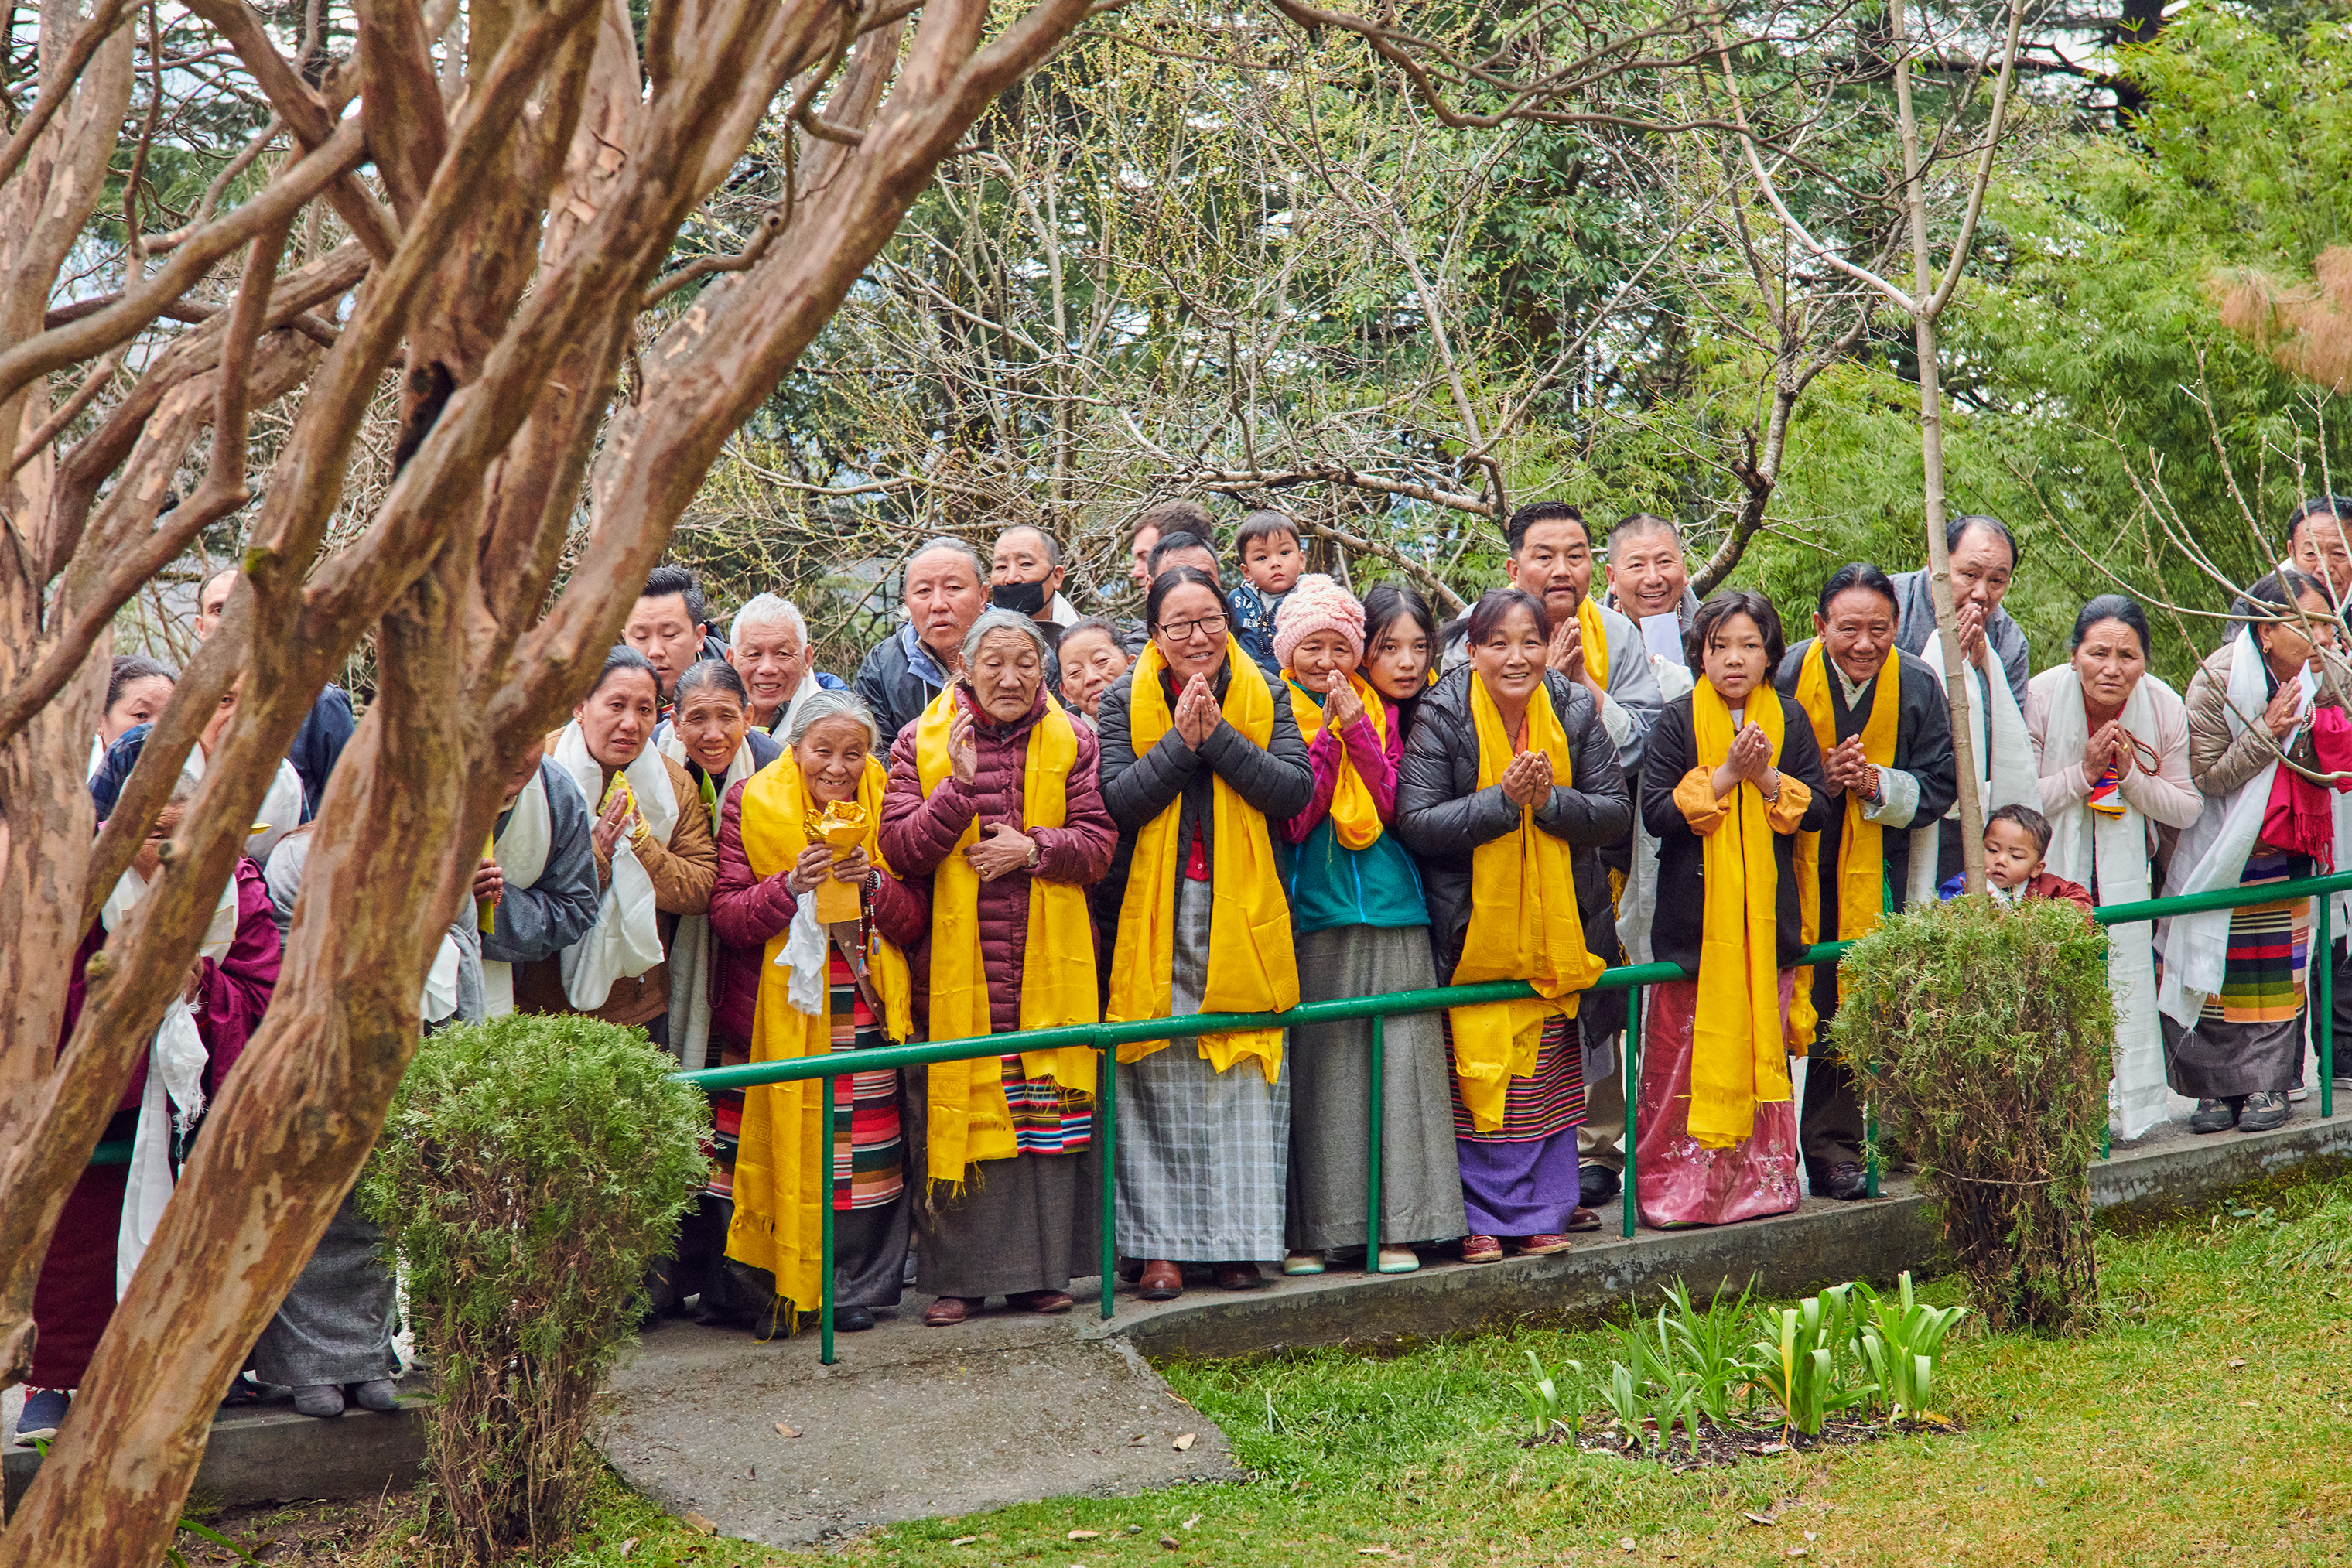 Around 300 devotees line up early at Tsuglagkhang temple to offer the Dalai Lama traditional khata scarves and to receive his blessing. (Ruven Afanador for TIME)